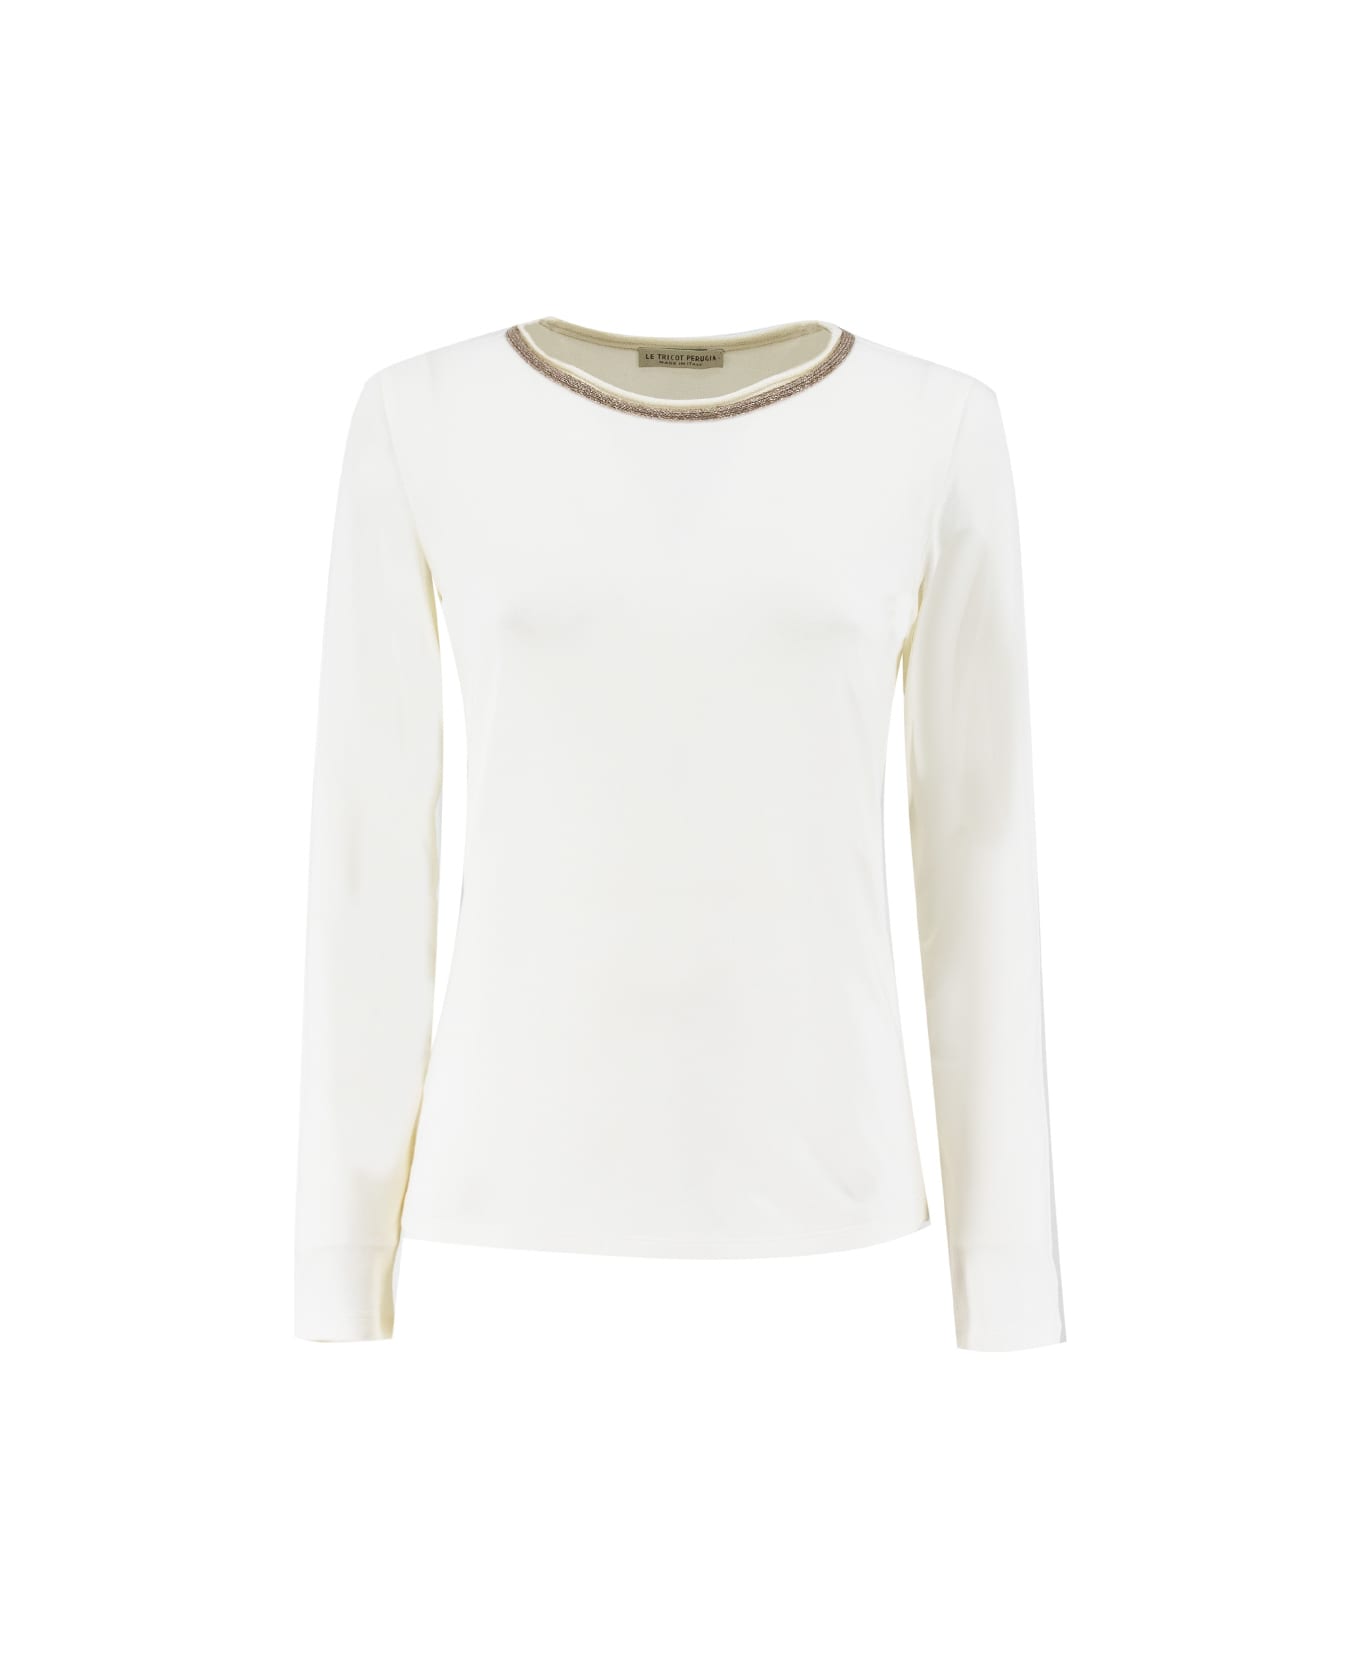 Le Tricot Perugia Sweater - OFFWHIT/OFFWHITE/BEI